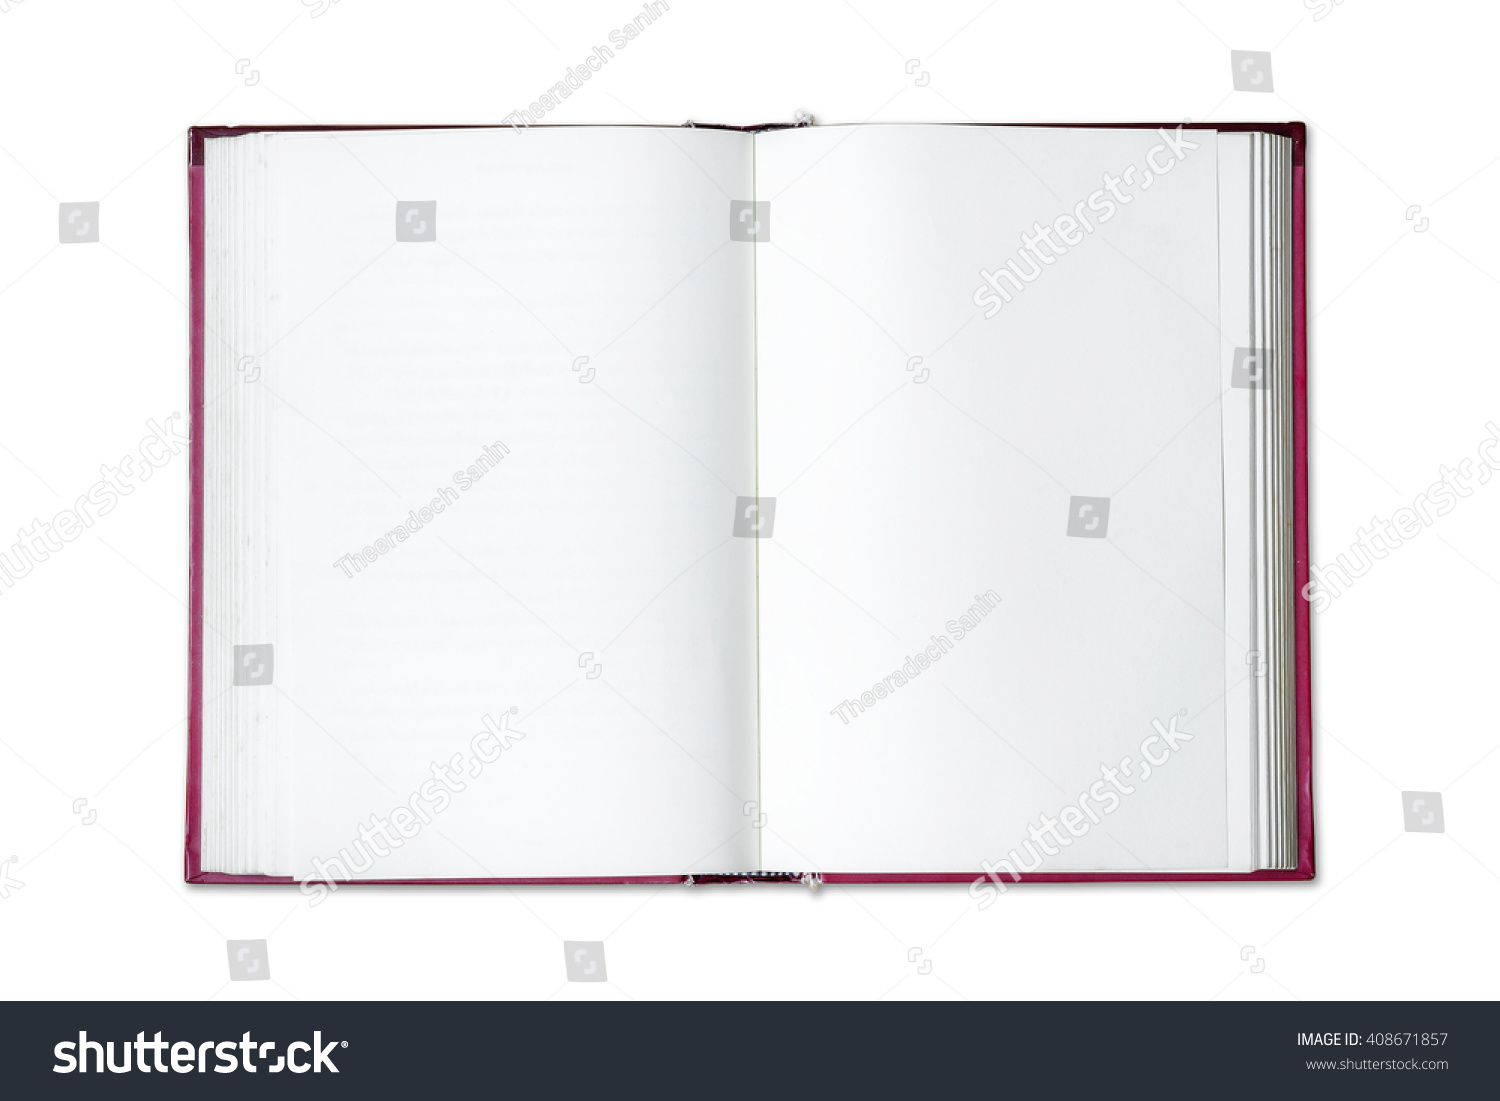 Open blank book isolated on white background. #408671857